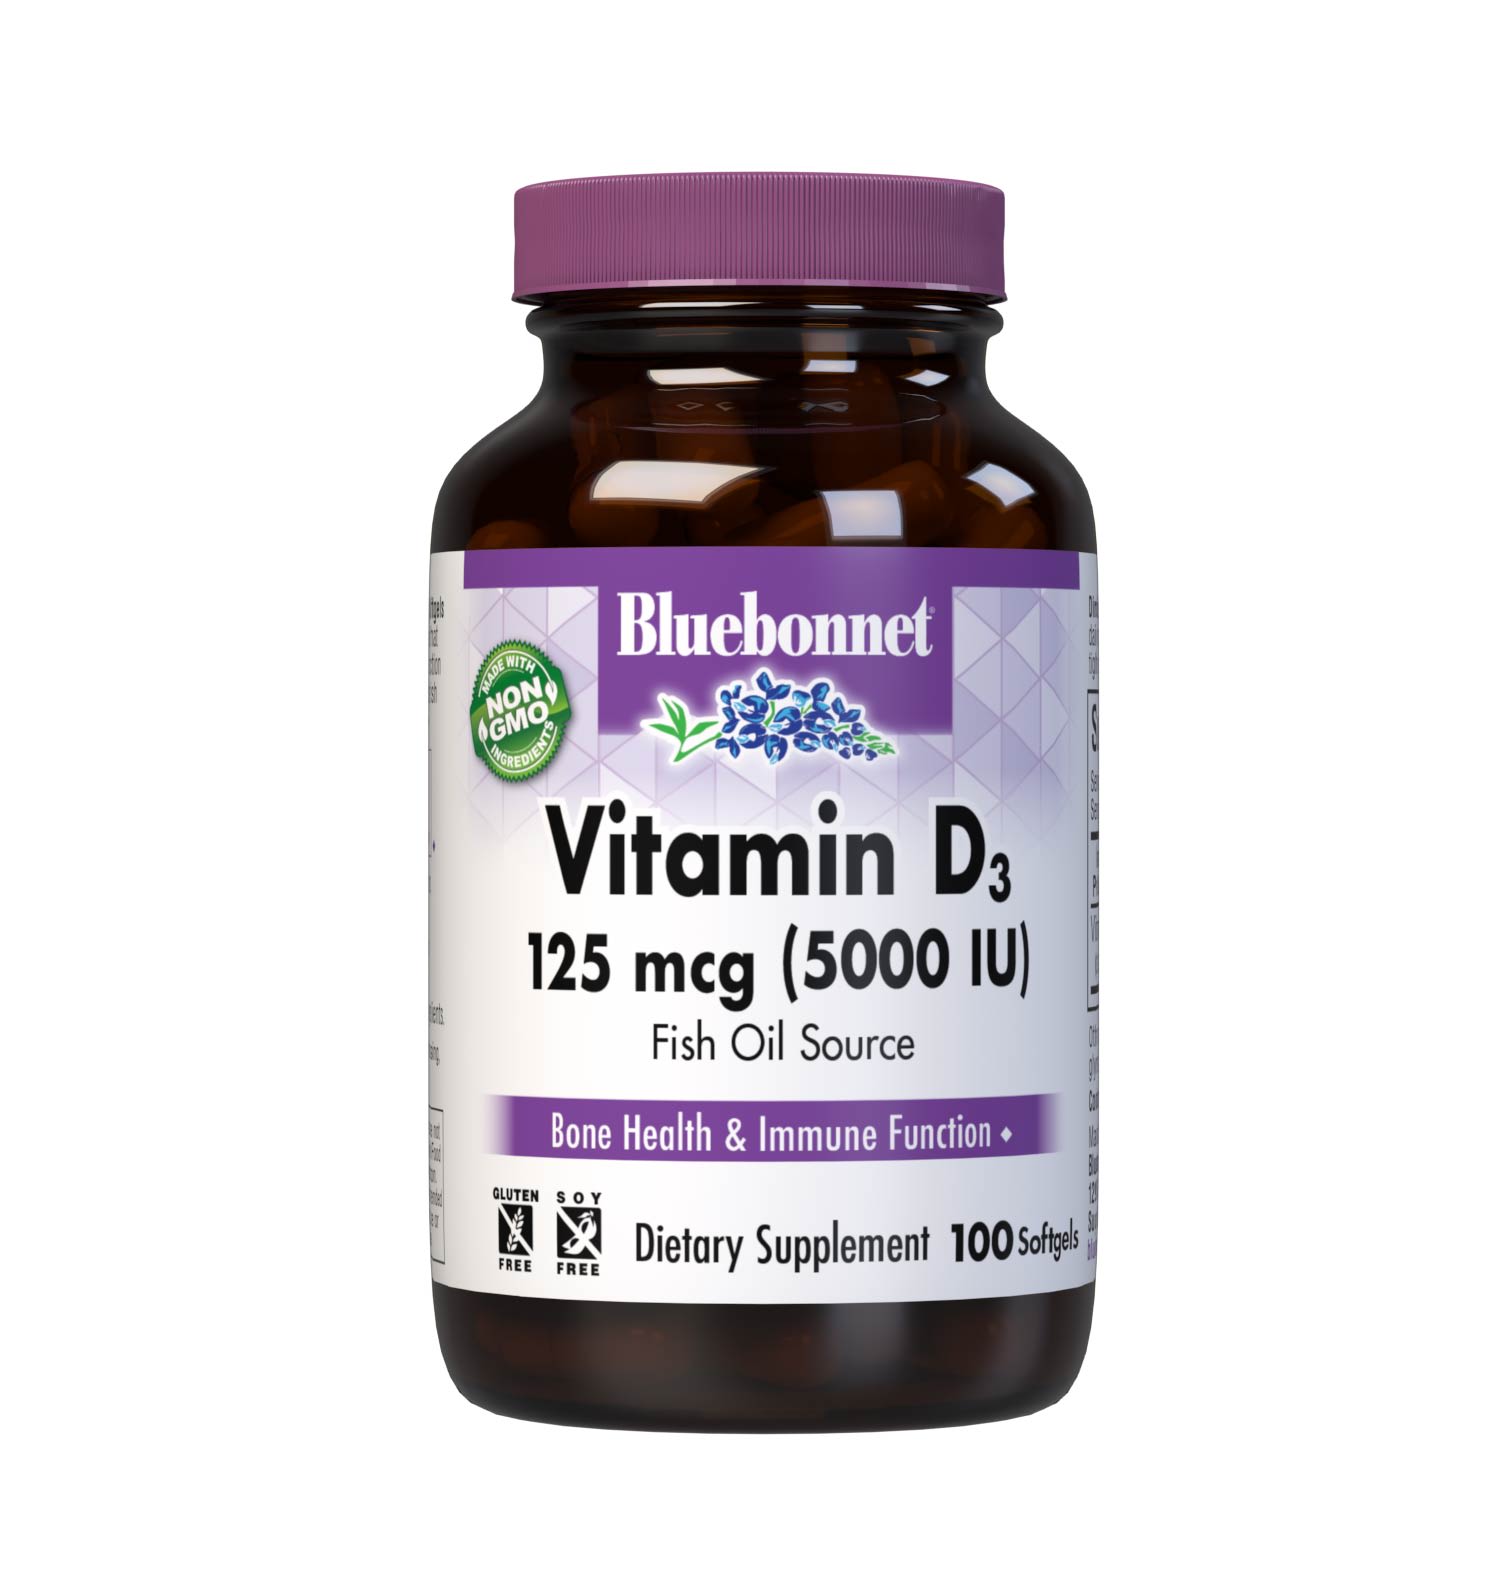 Bluebonnet’s Vitamin D3 125 mcg (5000 IU) Softgels are formulated with vitamin D3 (cholecalciferol) that supports strong healthy bones and immune function from molecularly distilled, deep sea, cold water, fish liver oil in a base of non-GMO safflower oil. #size_100 count